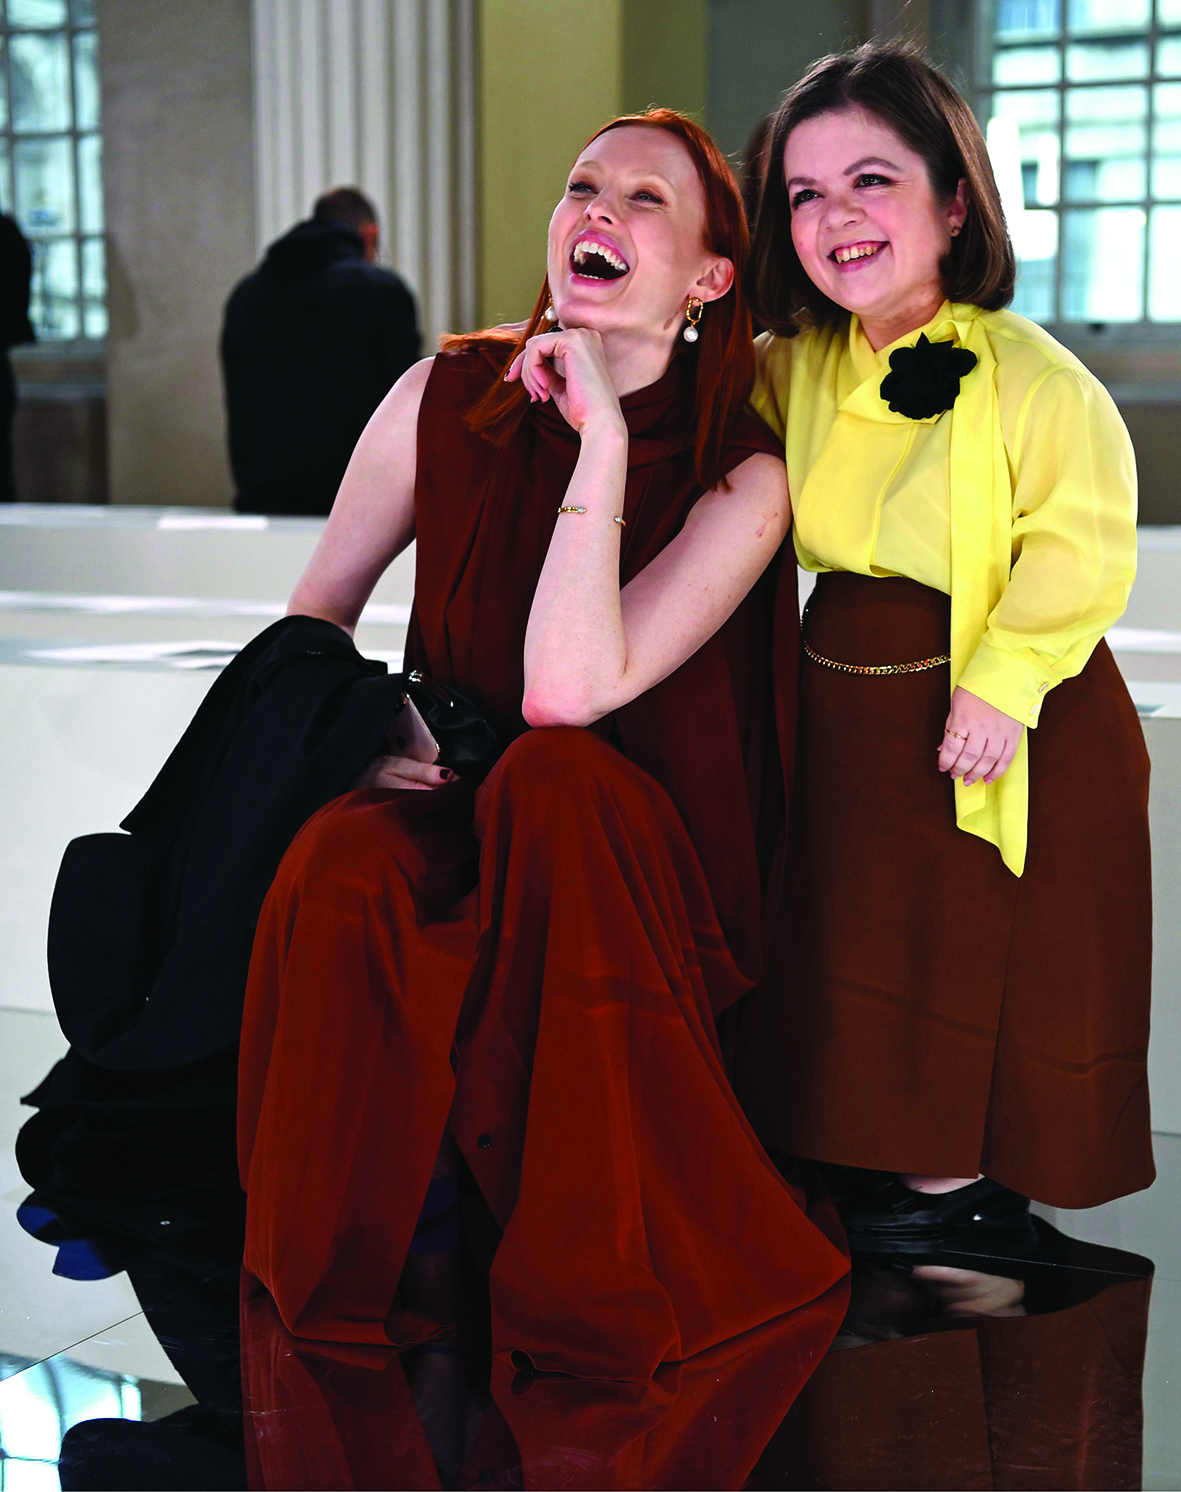 Sinead O'Burke (R) poses for a photograph with British model Karen Elson during London Fashion Week on February 16, 2020. - At a height of 105 centimeters, she challenges the greatest stylists, campaigning for a fashion accessible to all, SinÈad Burke, a 29-year-old Irishwoman, has become a voice that counts in the world of fashion. (Photo by DANIEL LEAL-OLIVAS / AFP) / TO GO WITH AFP STORY BY PAULINE FROISSART